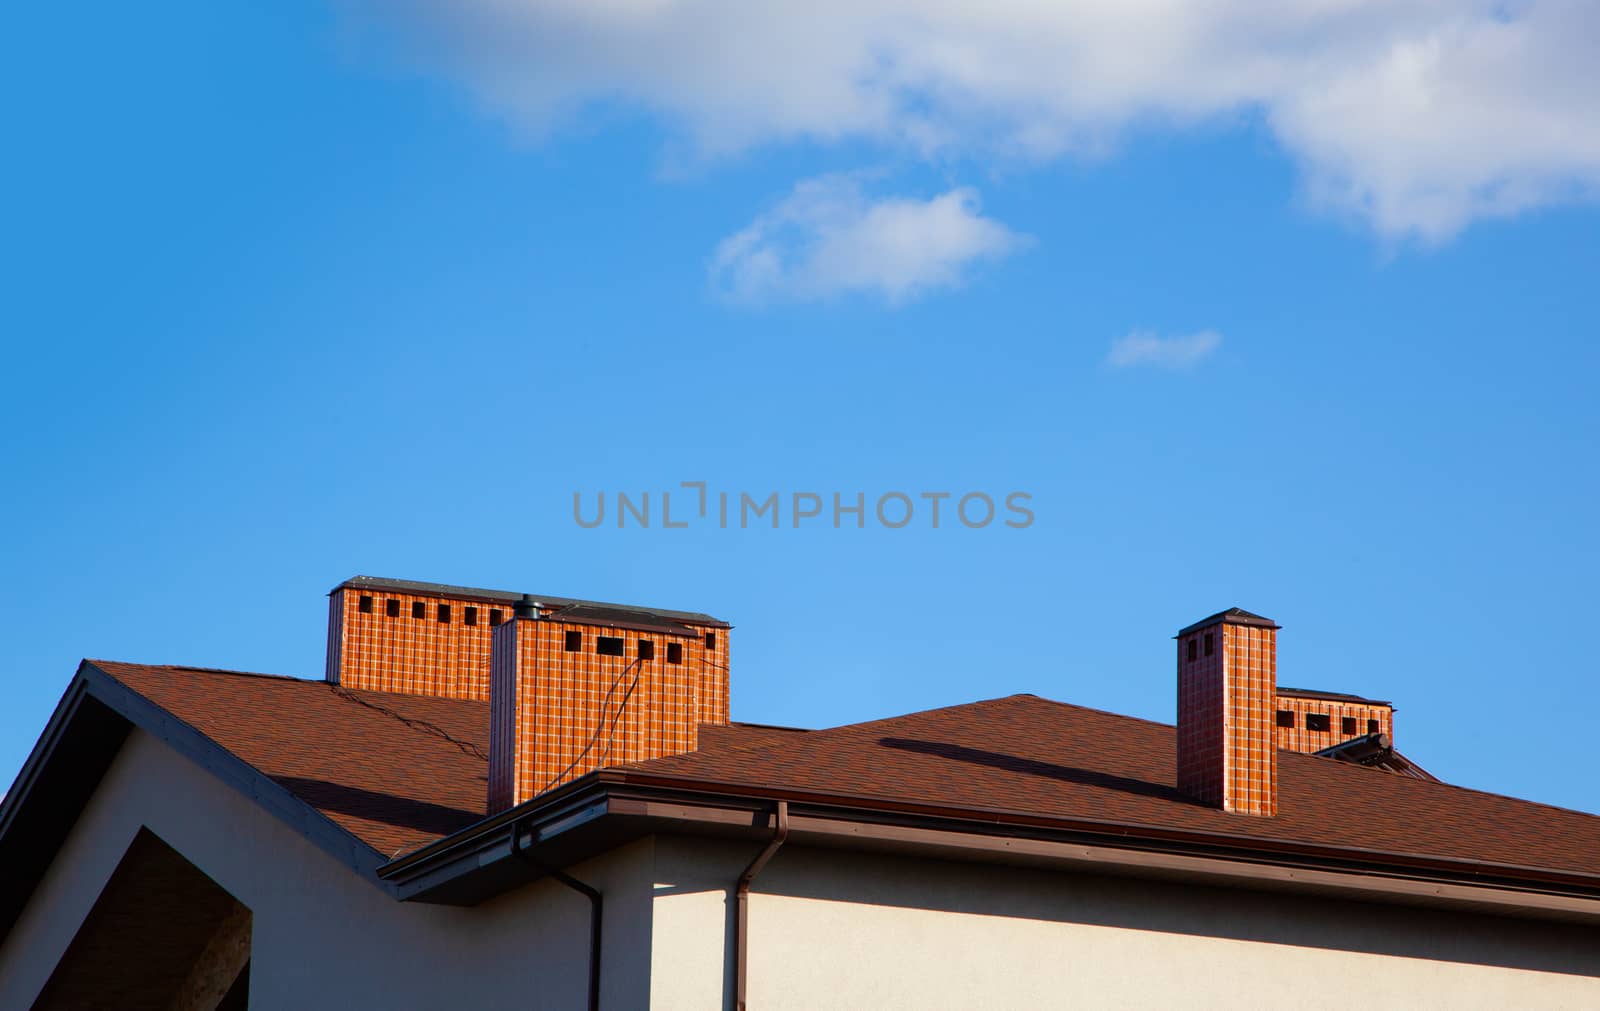 Chimneys on the roof of the house, against the blue sky by SlayCer